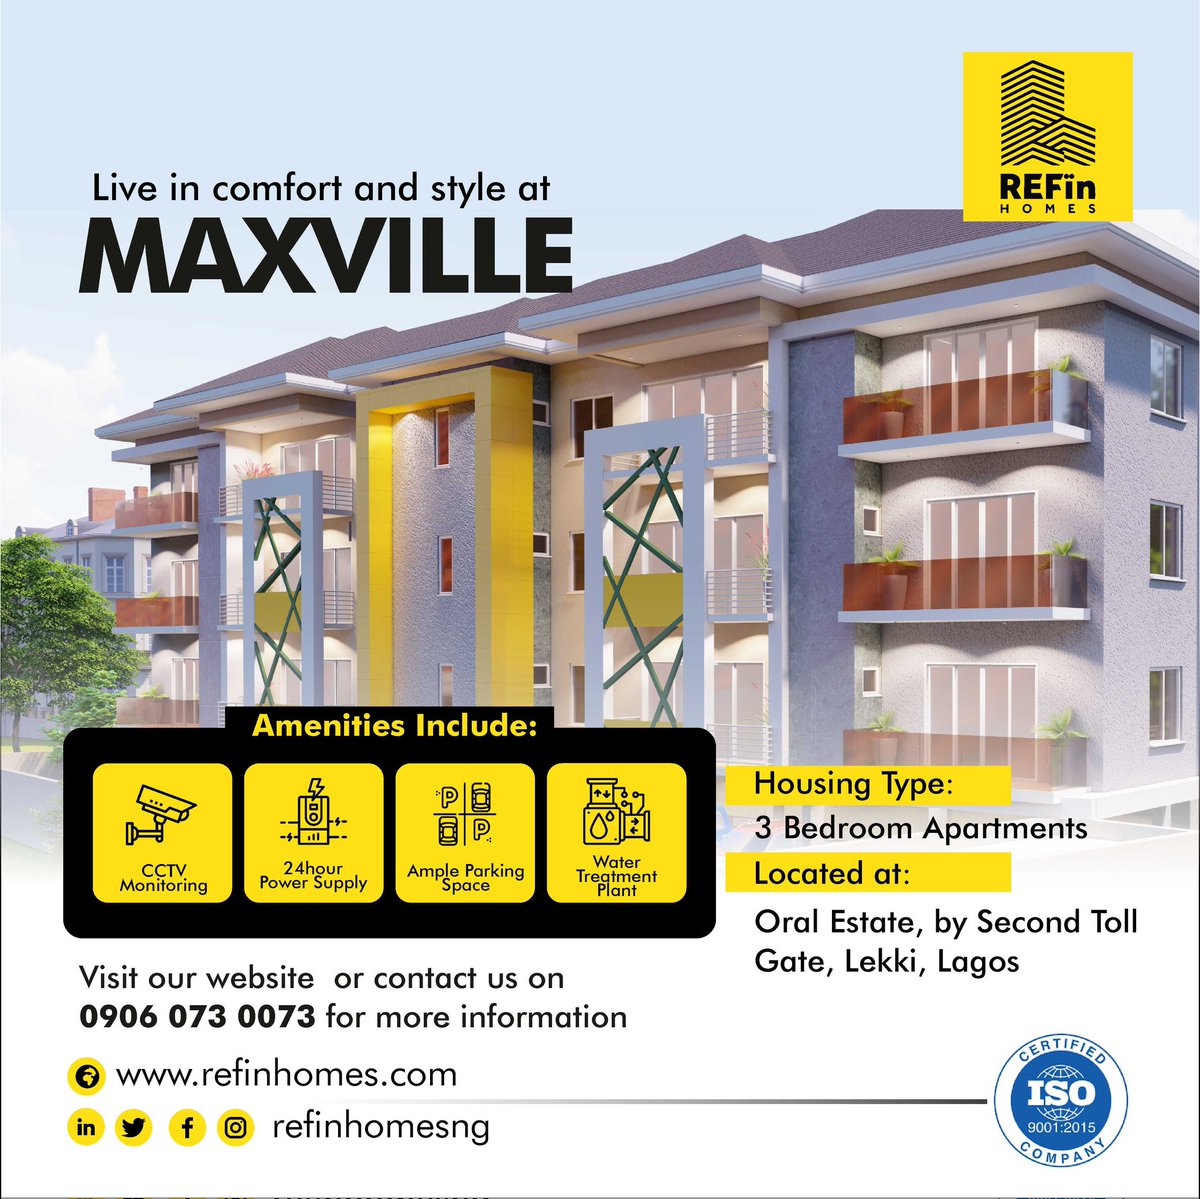 Live in Comfort and Style at MAXVILLE

Visit our website or contact us on 09060730073 for more information

#RealEstate #realestateinlagos #realestateinnigeria #realestatetips #realestateinvestment #realestatemarketing #communitybuilders #lekkihomes #affordablehousing #quality